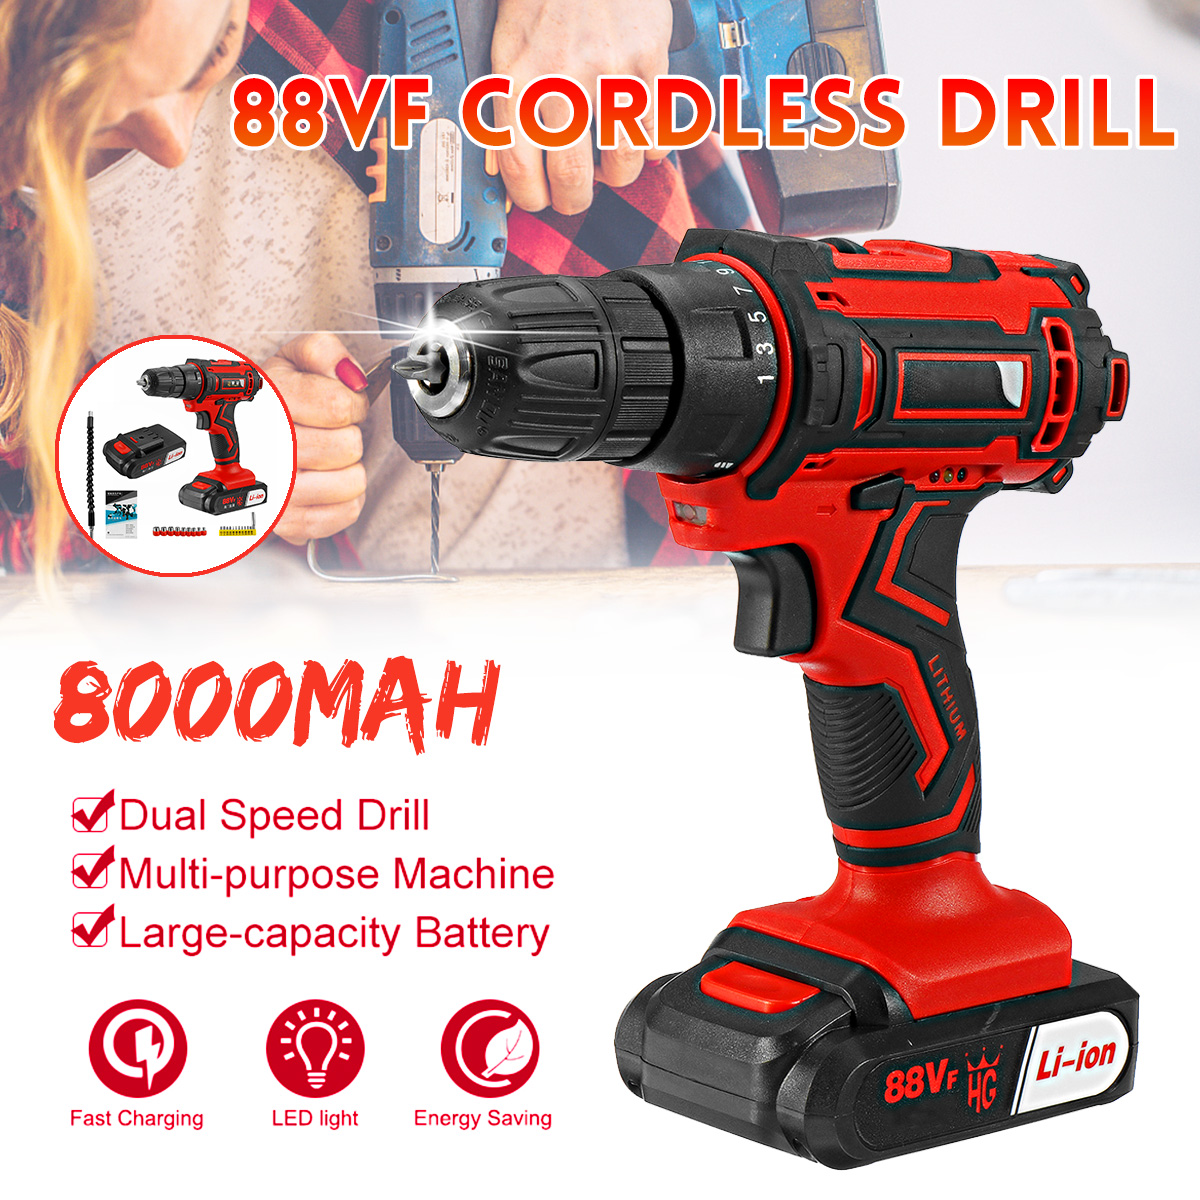 88VF-Cordless-Electric-Drill-Driver-251-Gears-Rechargeable-Screwdriver-W-12pcs-Battery--LED-Working--1847800-1